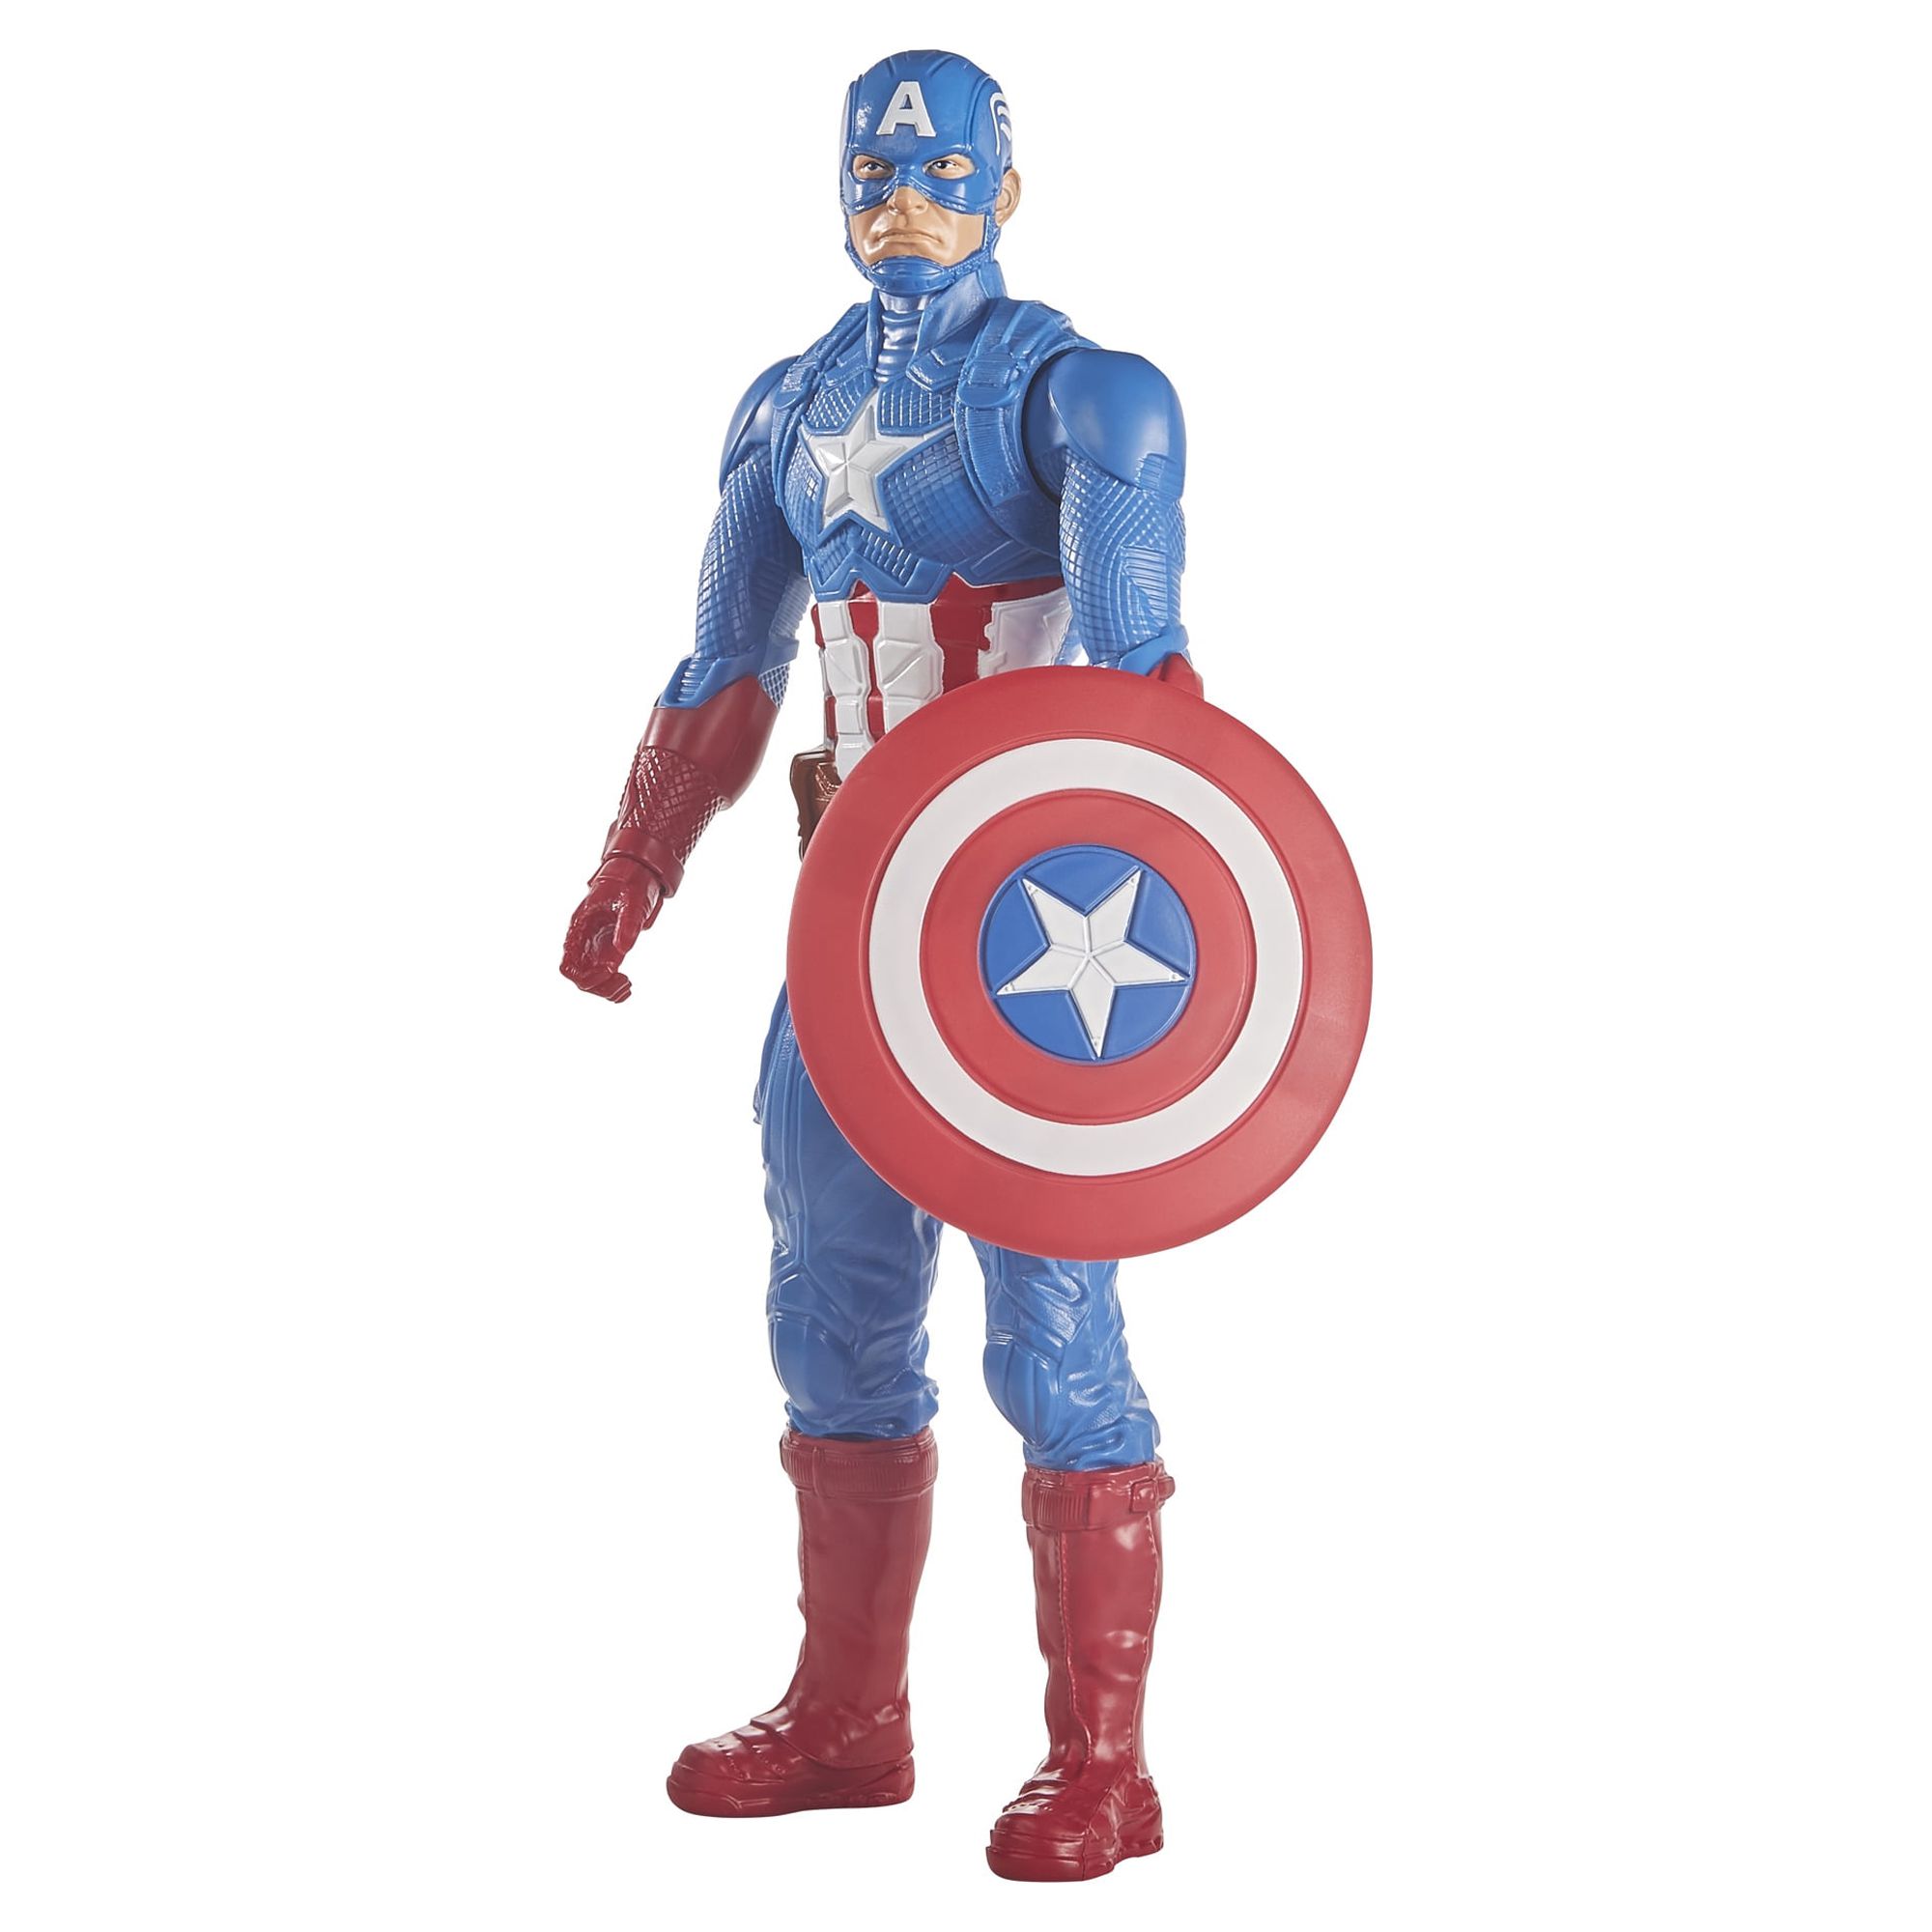 Marvel: Avengers Titan Hero Series Captain America Kids Toy Action Figure for Boys and Girls Ages 4 5 6 7 8 and Up (12”) - image 4 of 8